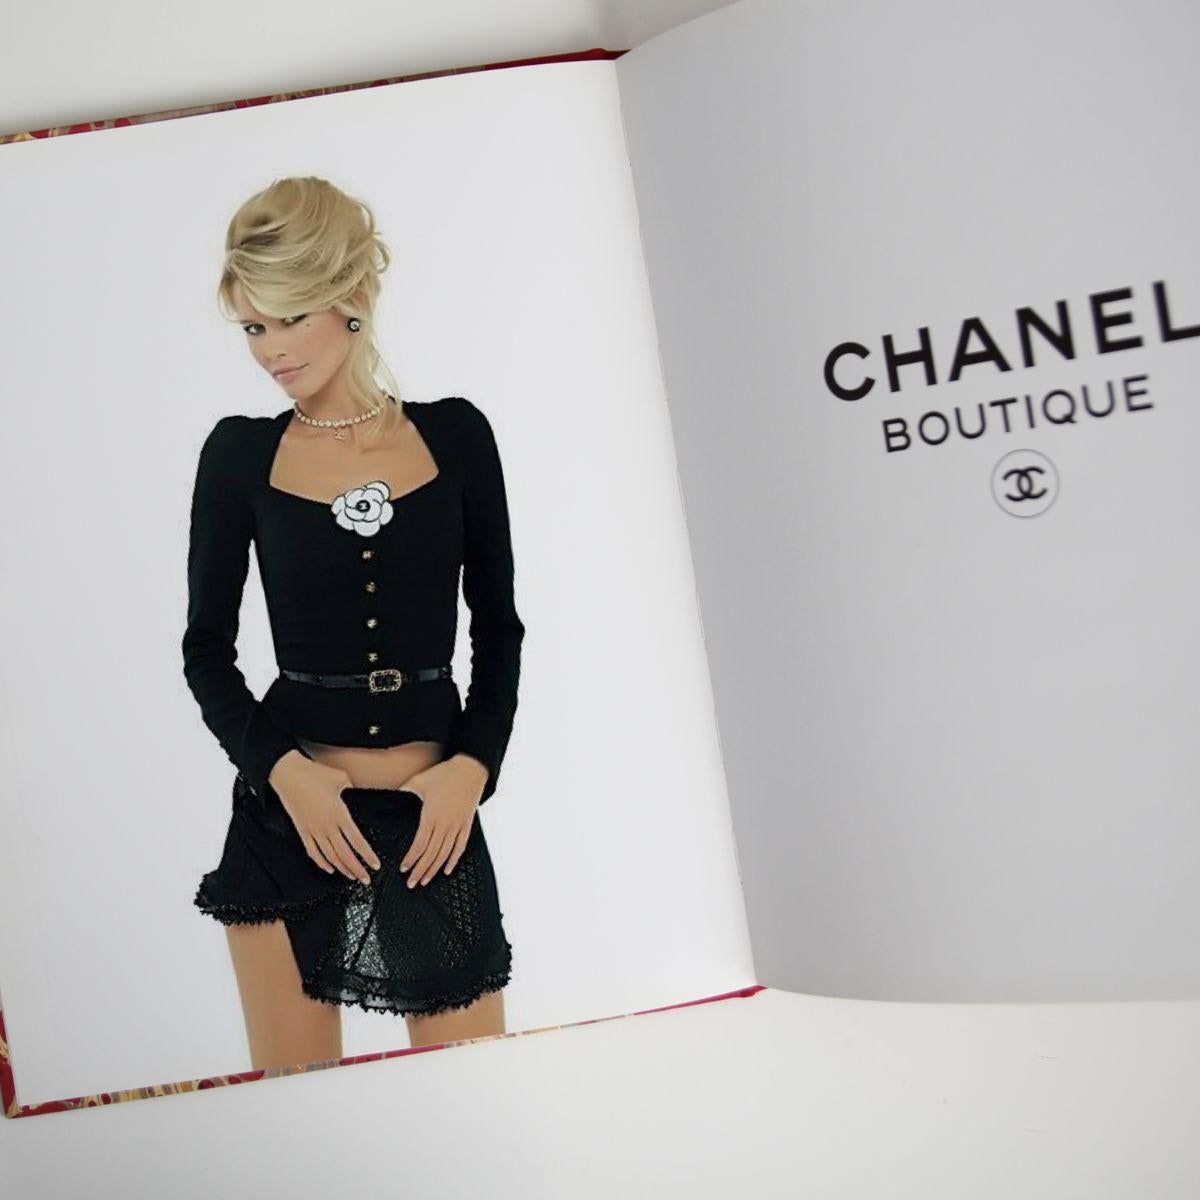 CHANEL 1995 Black Jacket with Patent Leather Belt & CC Buttons by Karl Lagerfeld 1